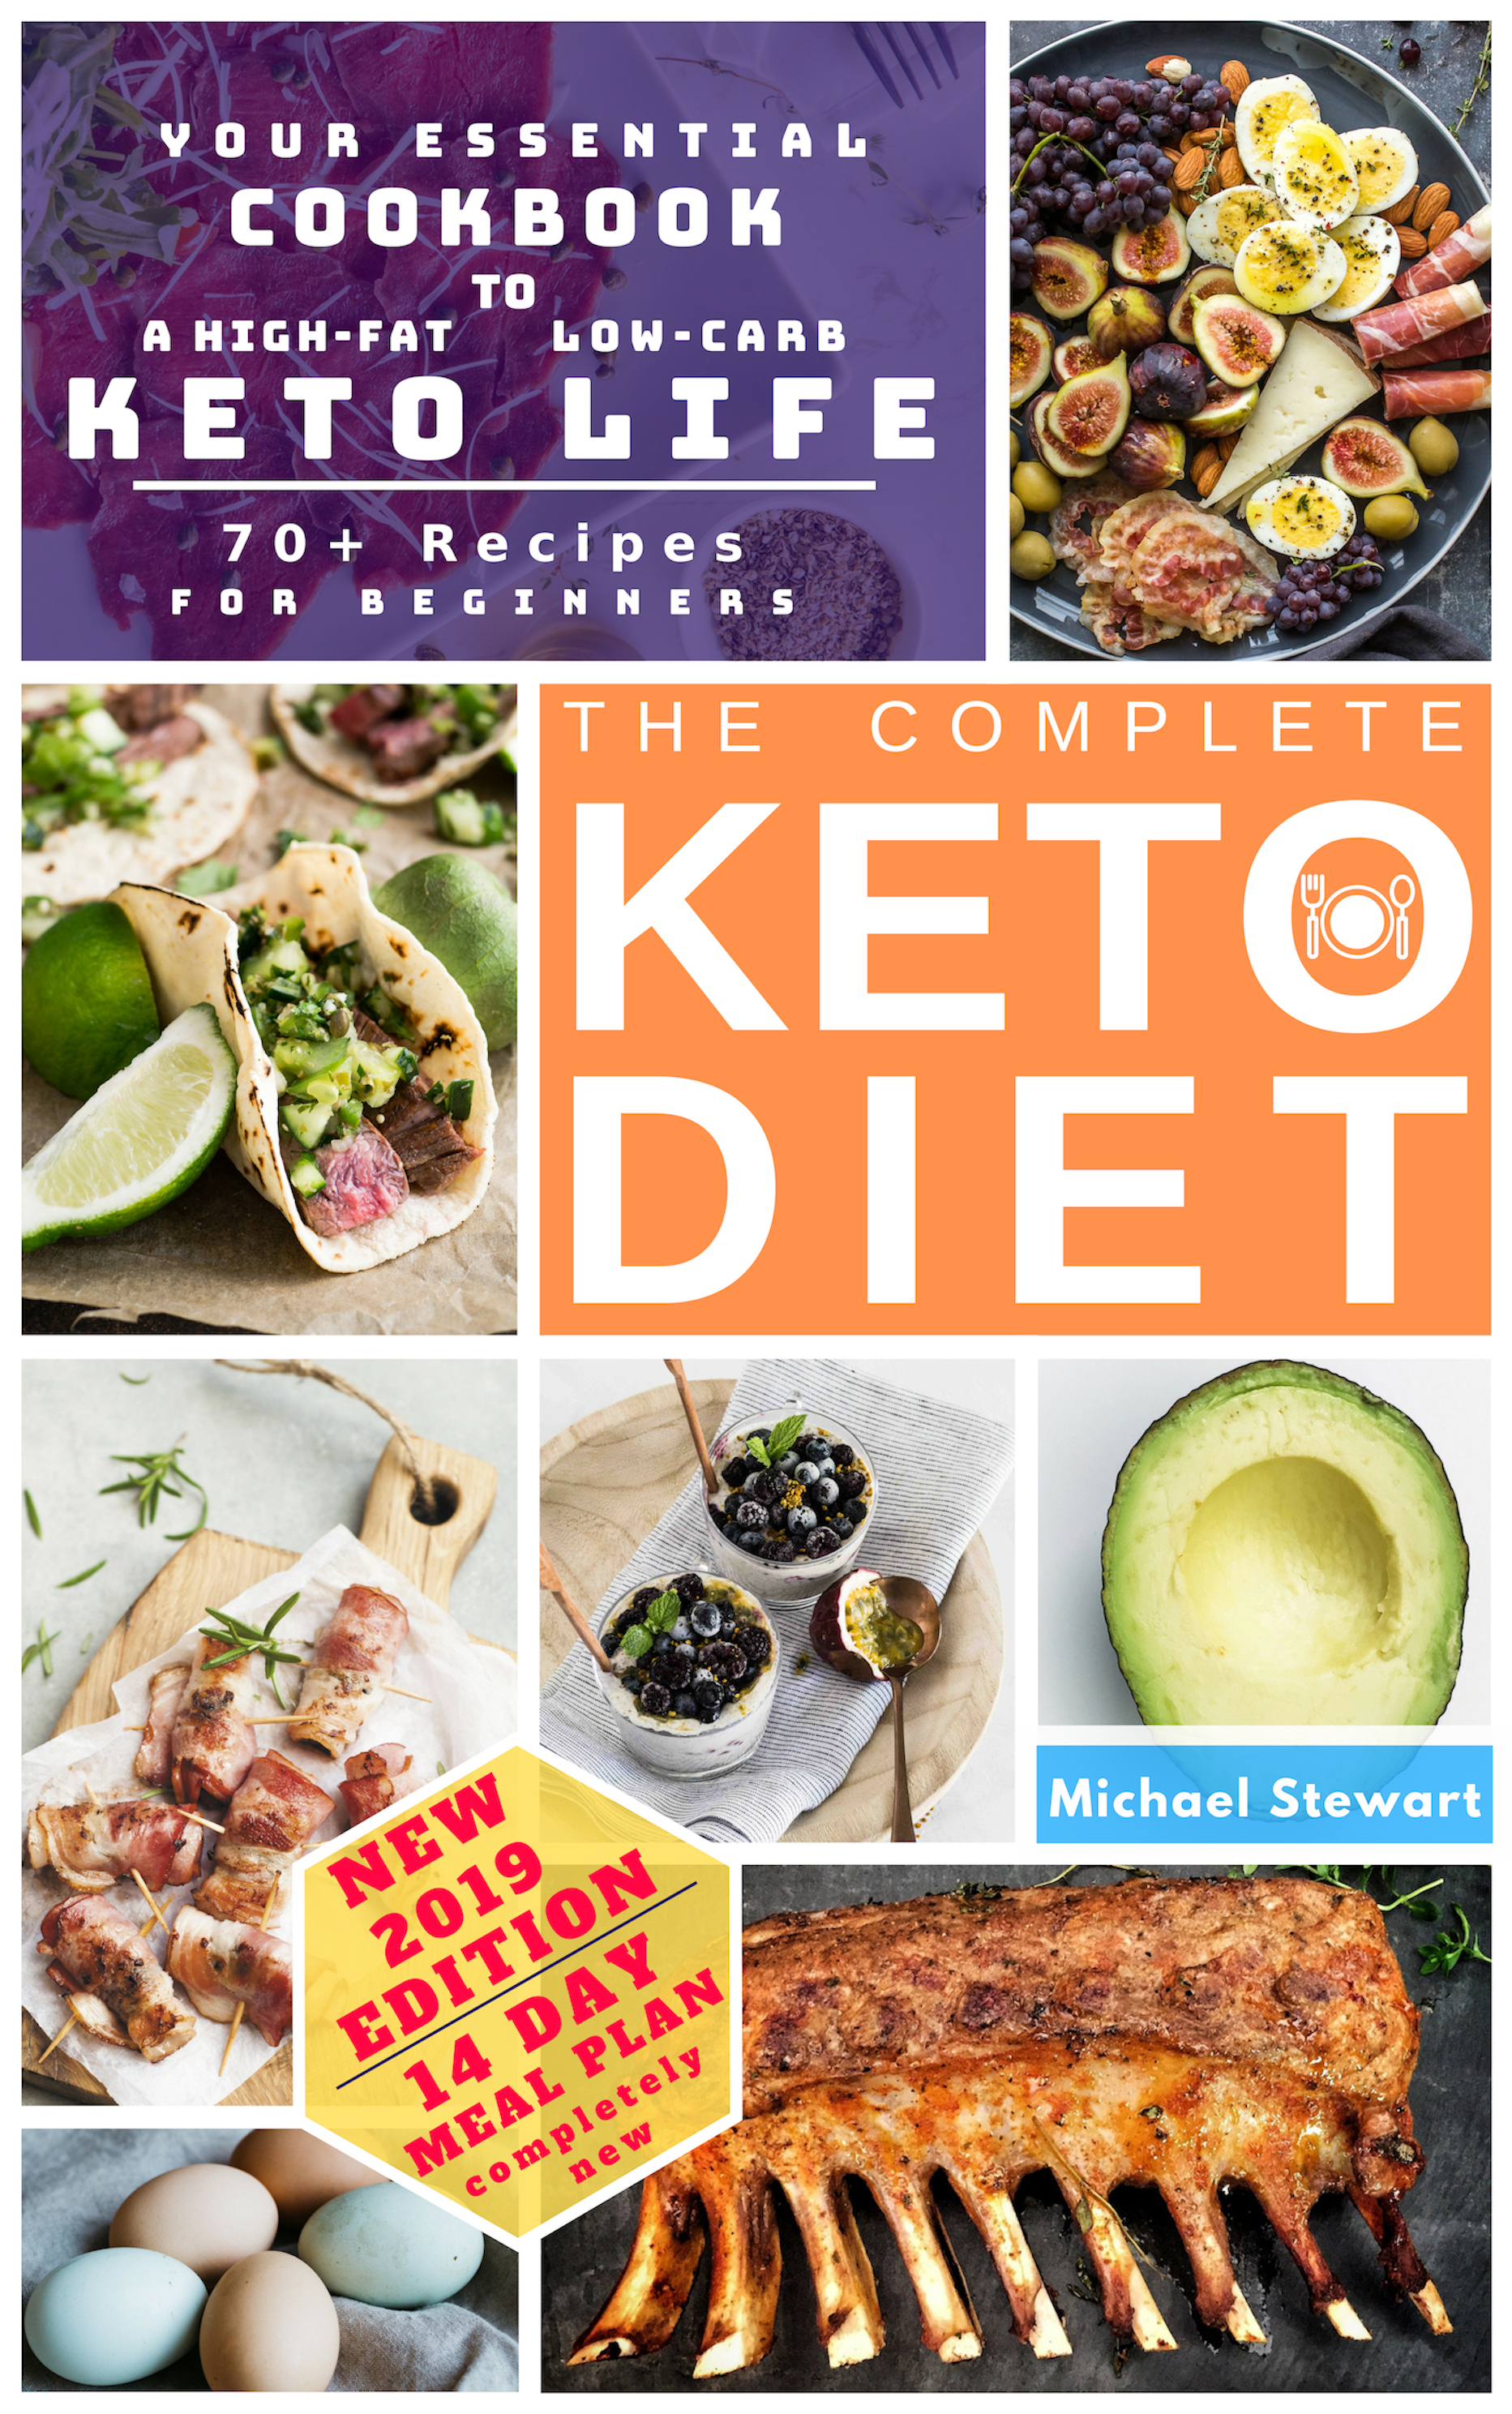 FREE: The Complete Keto Diet for Beginners: Your Essential Cookbook to a High-Low, Low-Carb Keto Life | Completely New 14-Day Meal Plan by michael